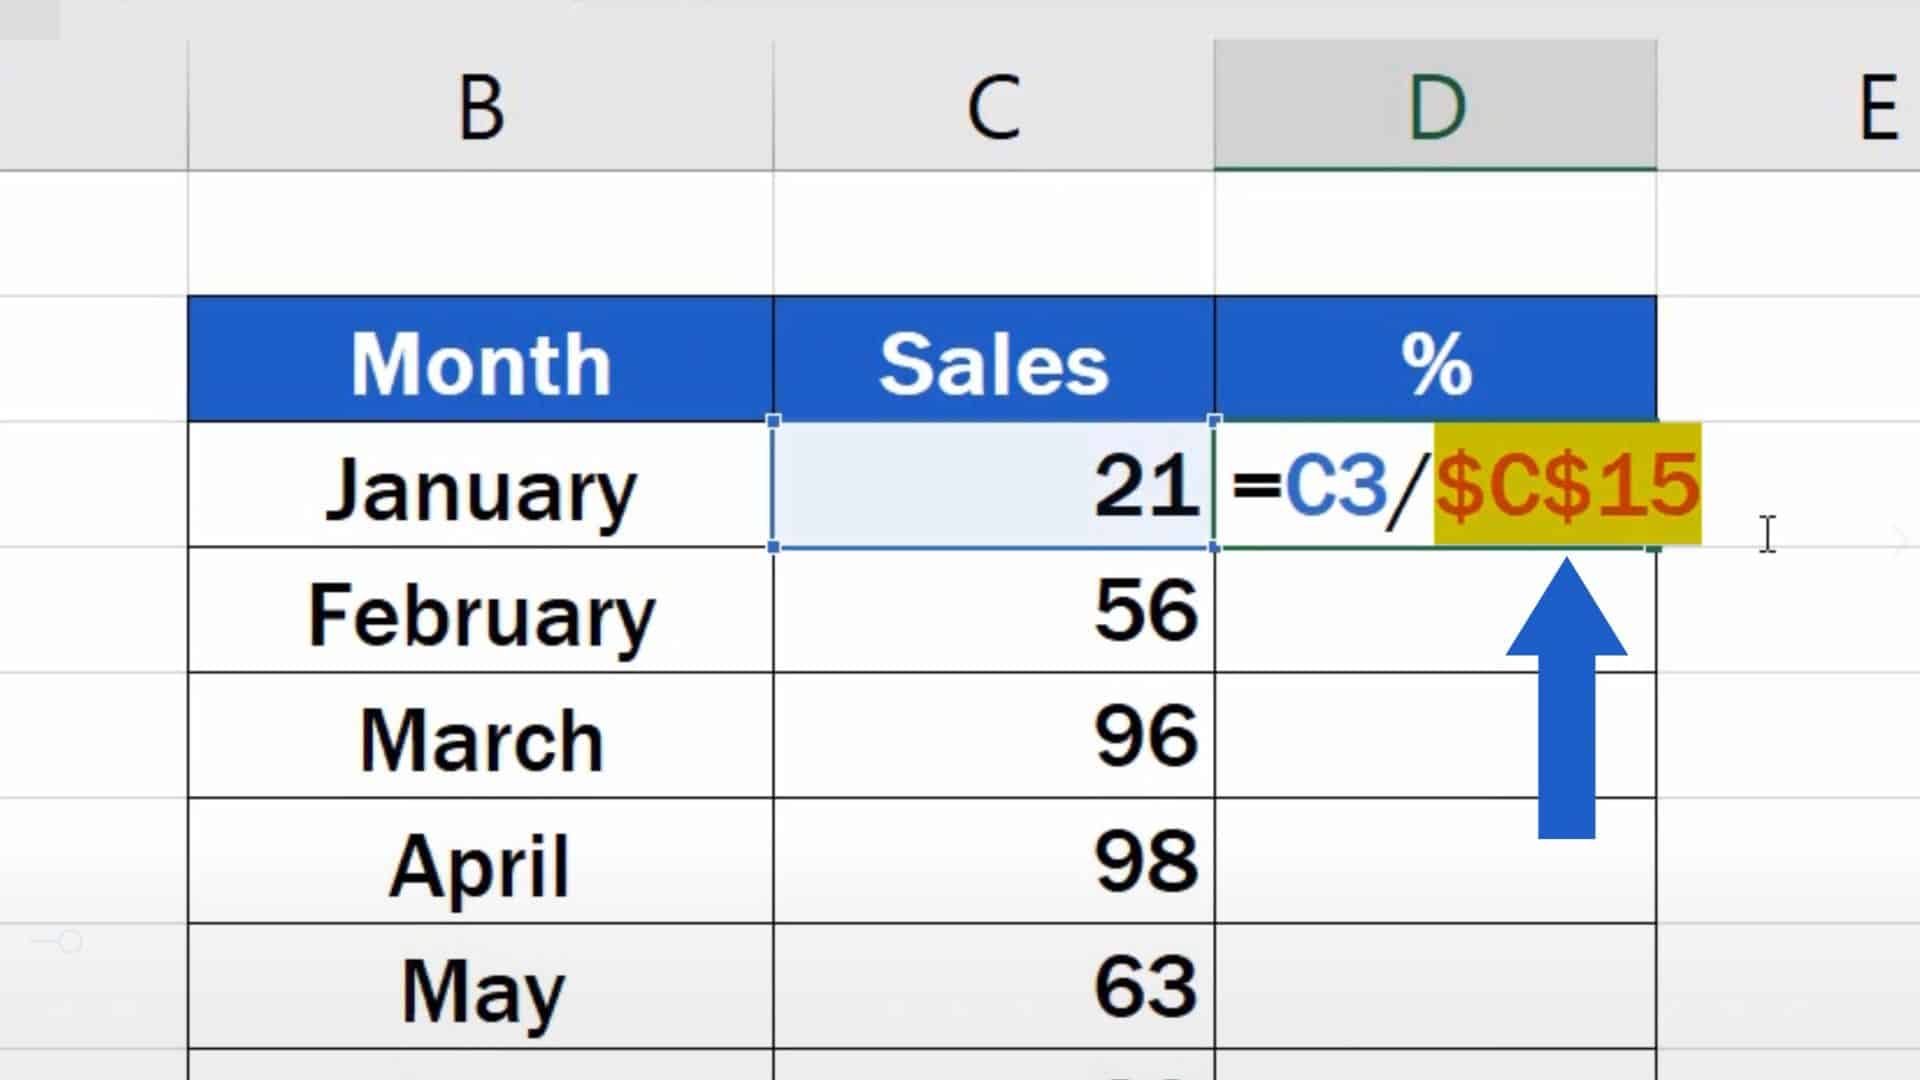 how-to-use-absolute-cell-reference-in-excel